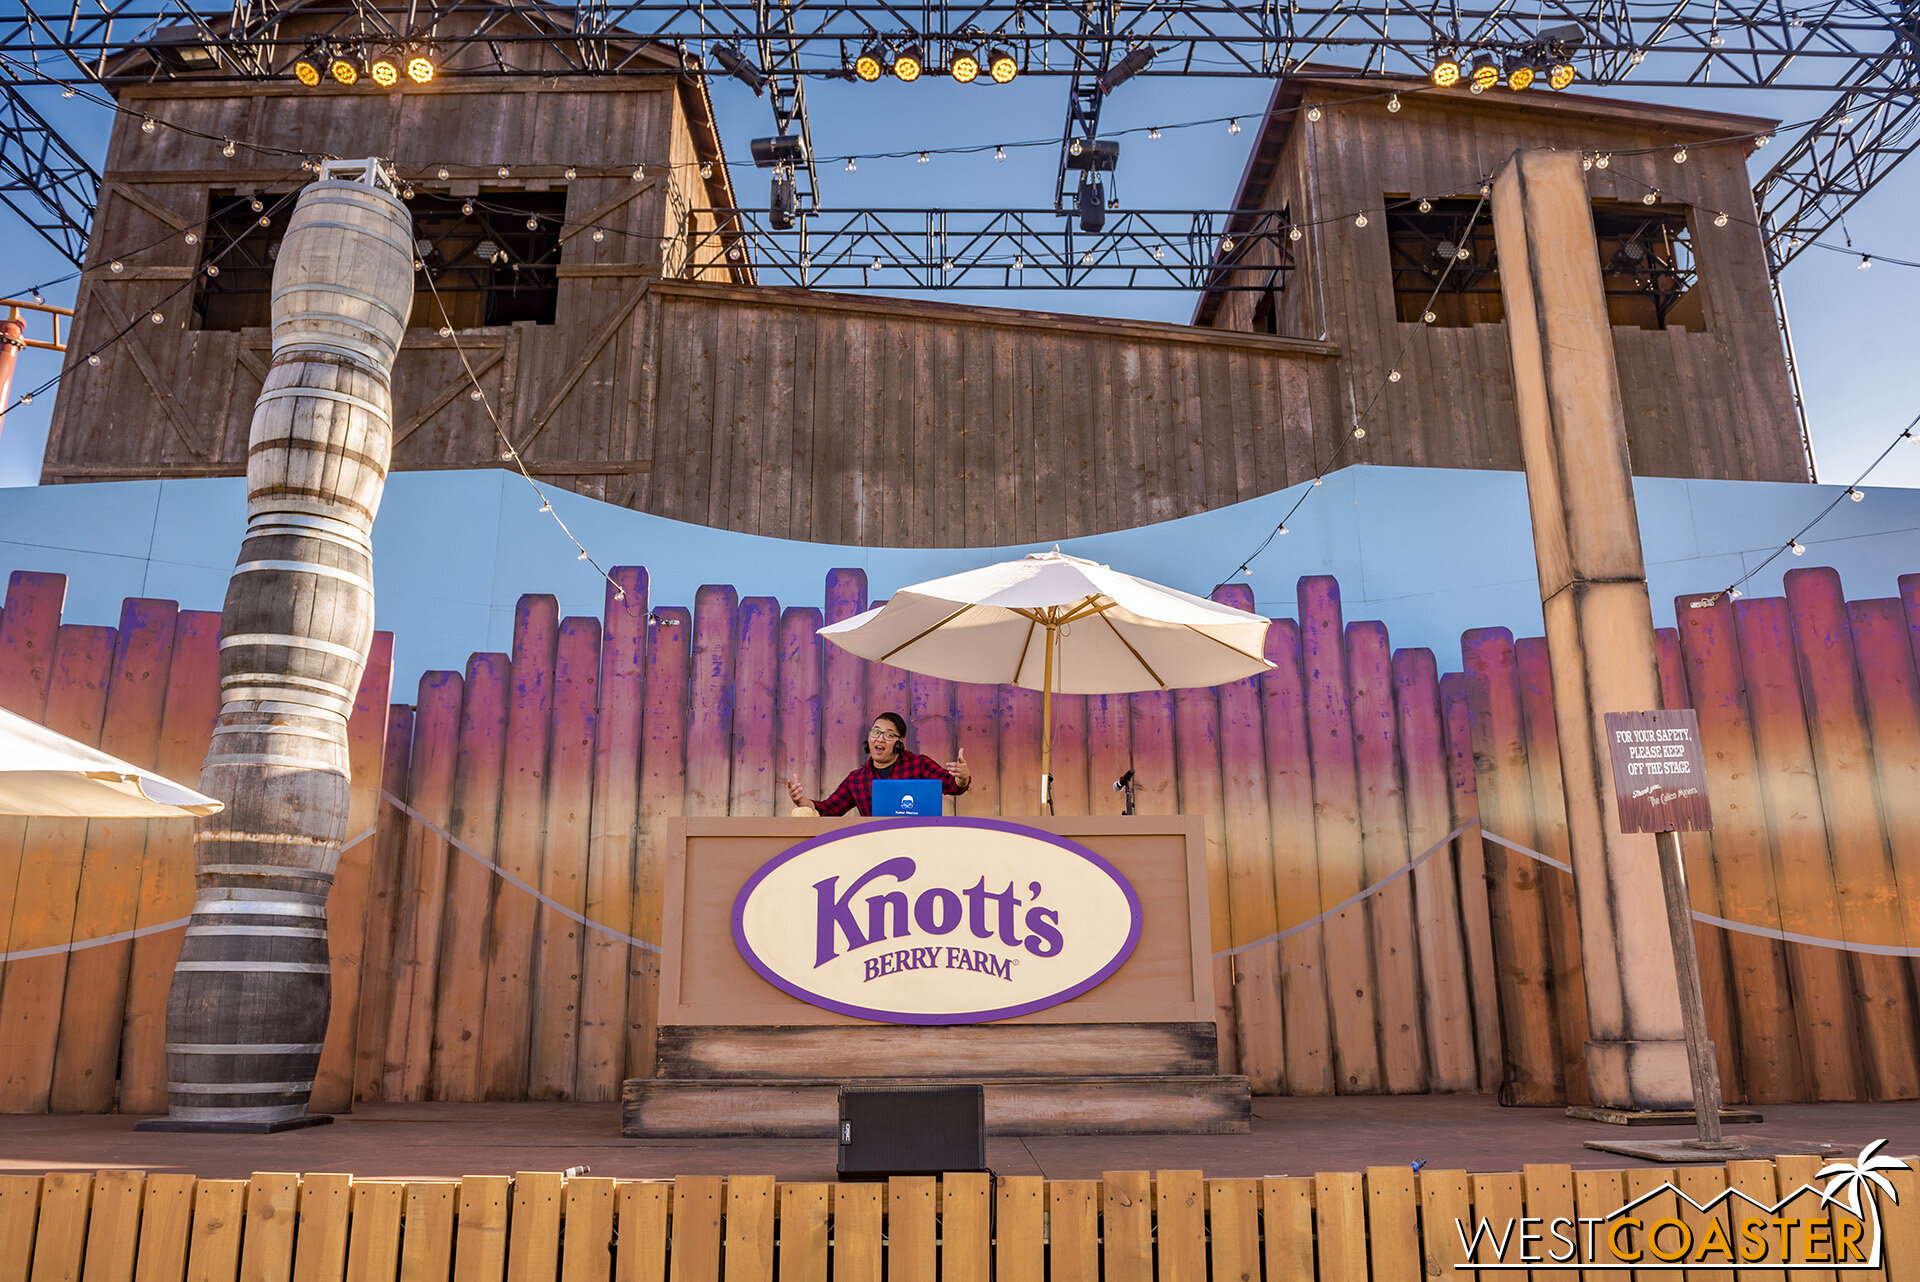  DJ Katar was in the house for Knott’s on this night. 